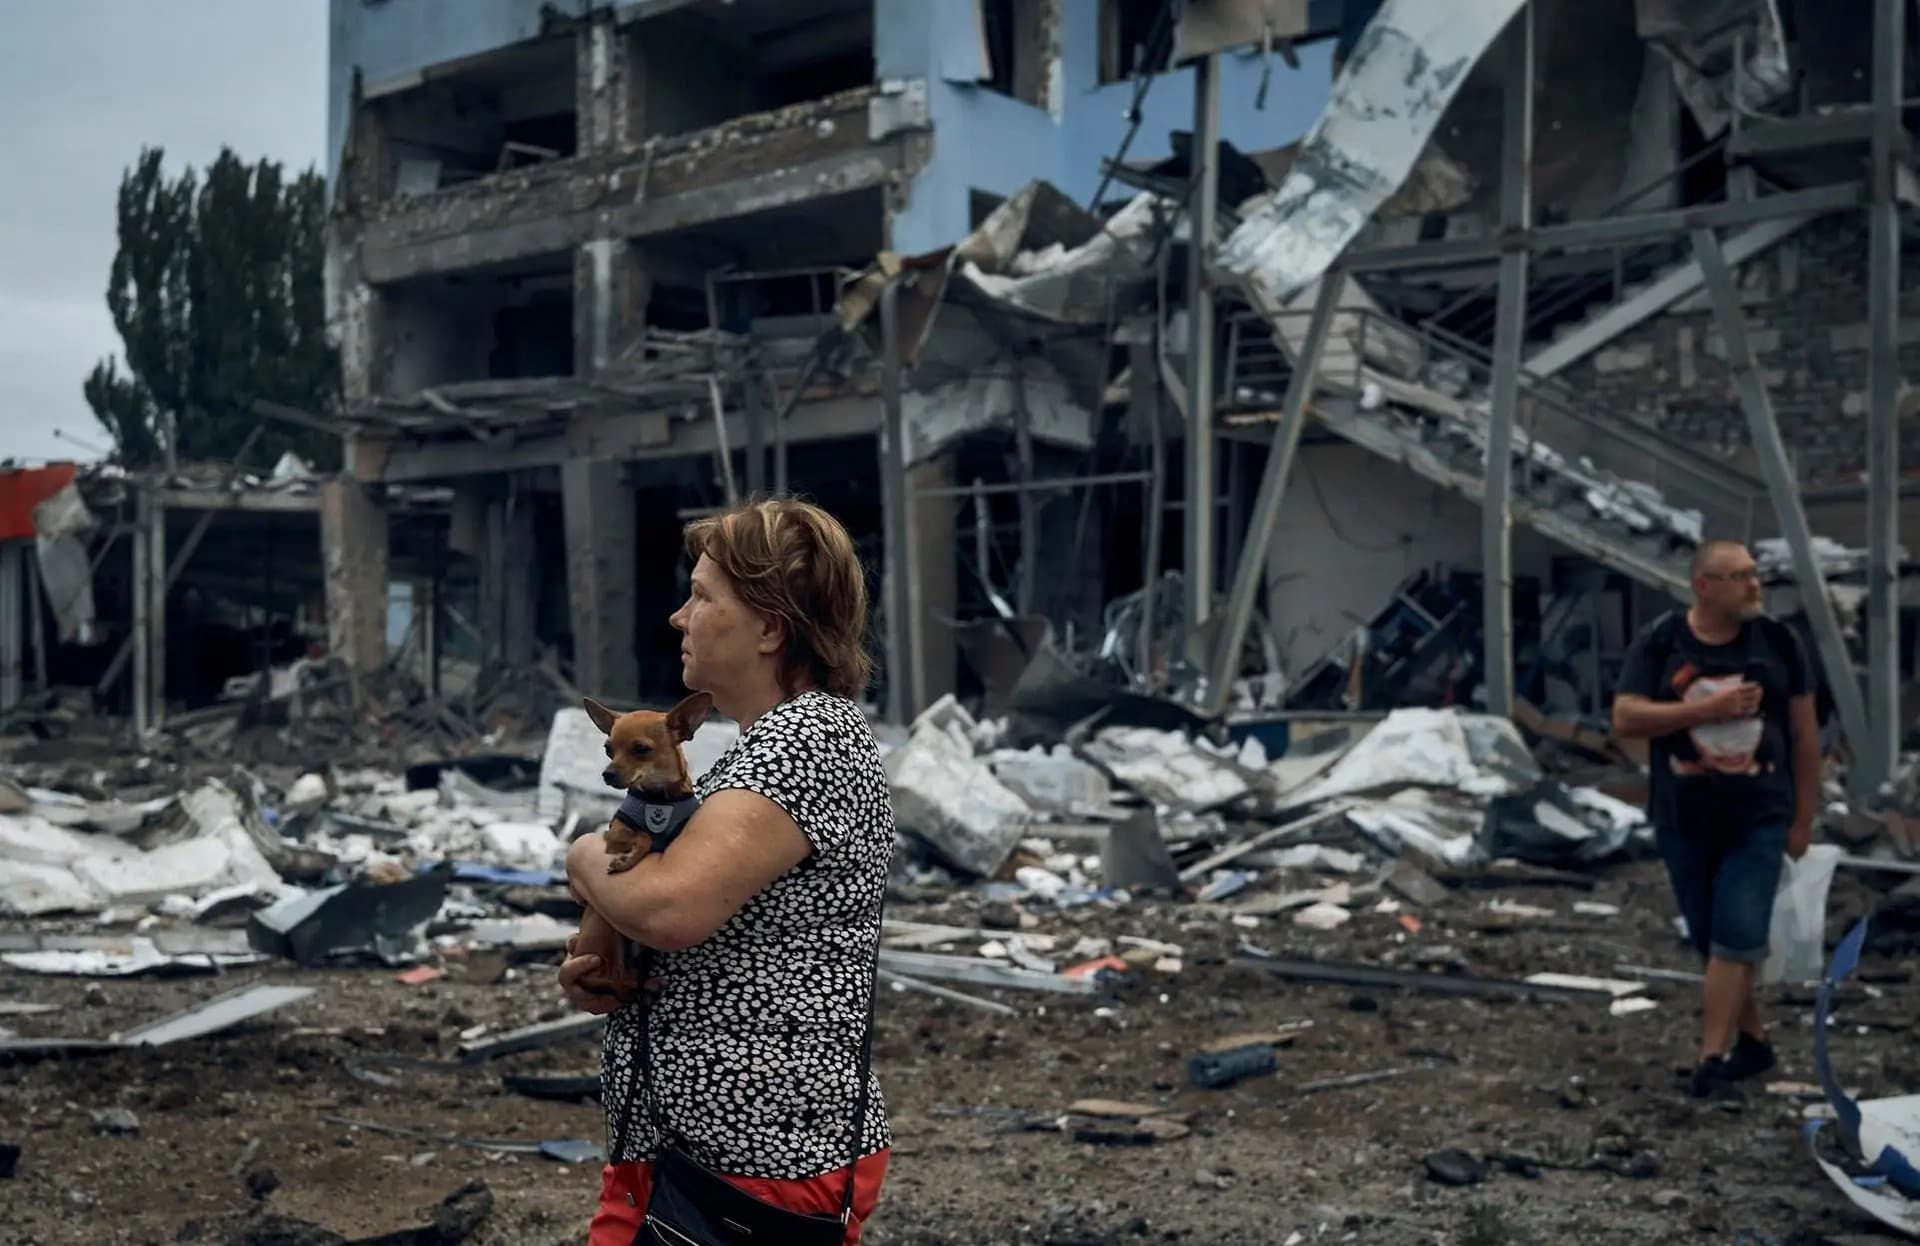 A woman holds a dog in the aftermath of the Russian shelling in Mykolaiv